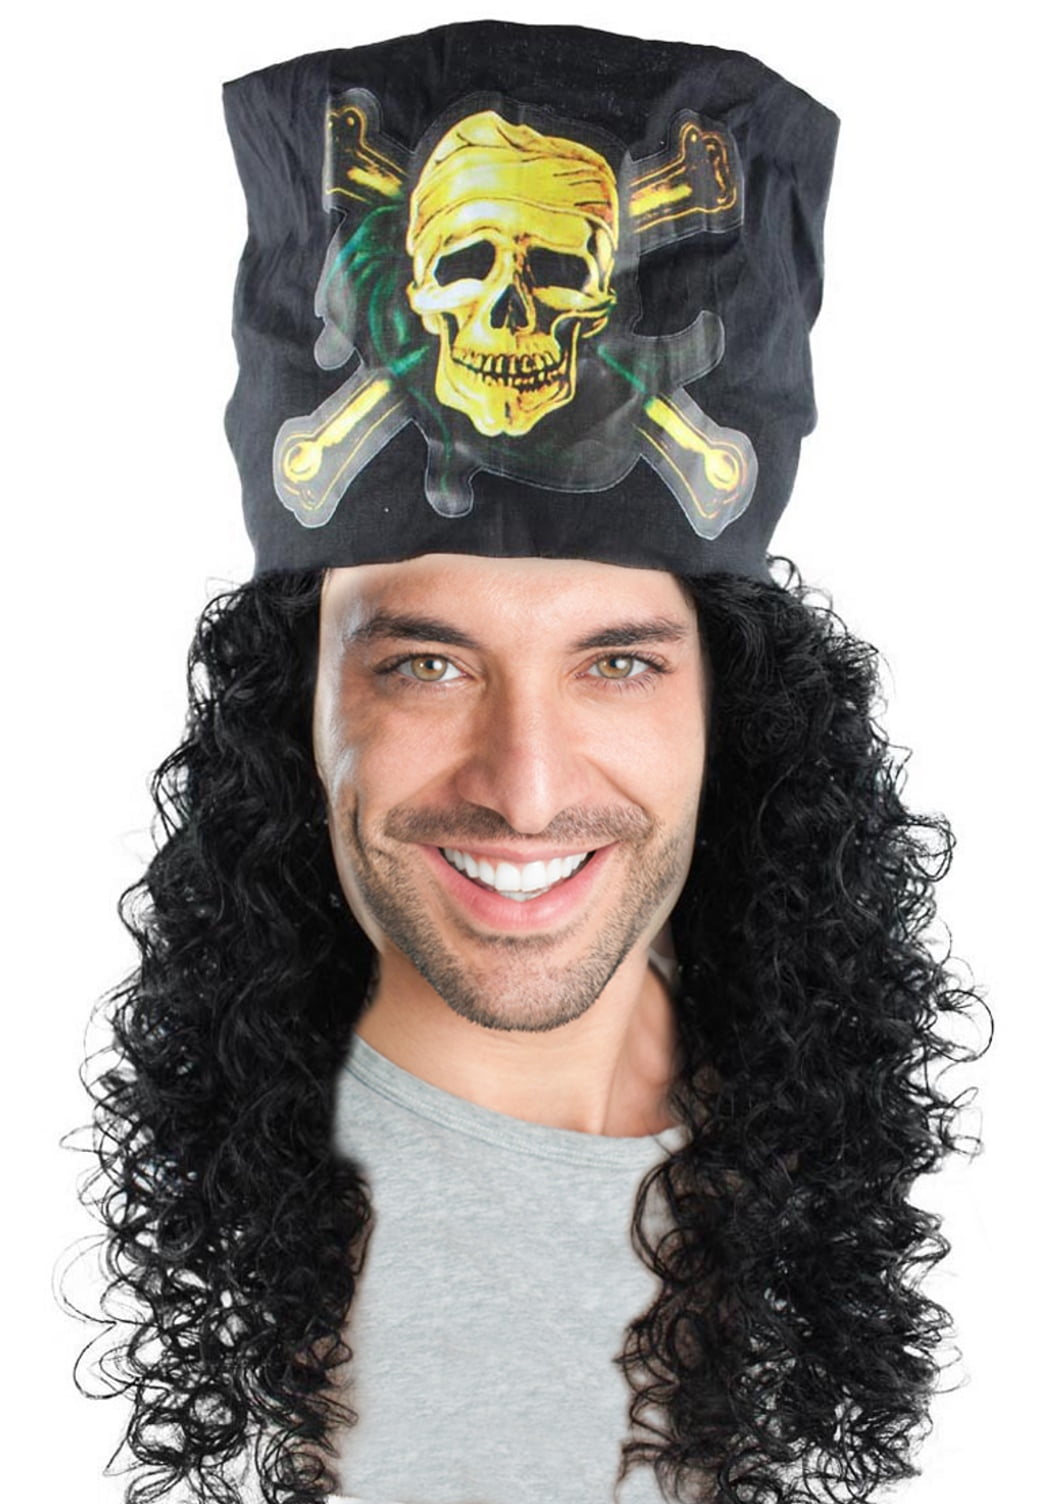  Topcosplay Pirate Captain Costume Wig for Adult or